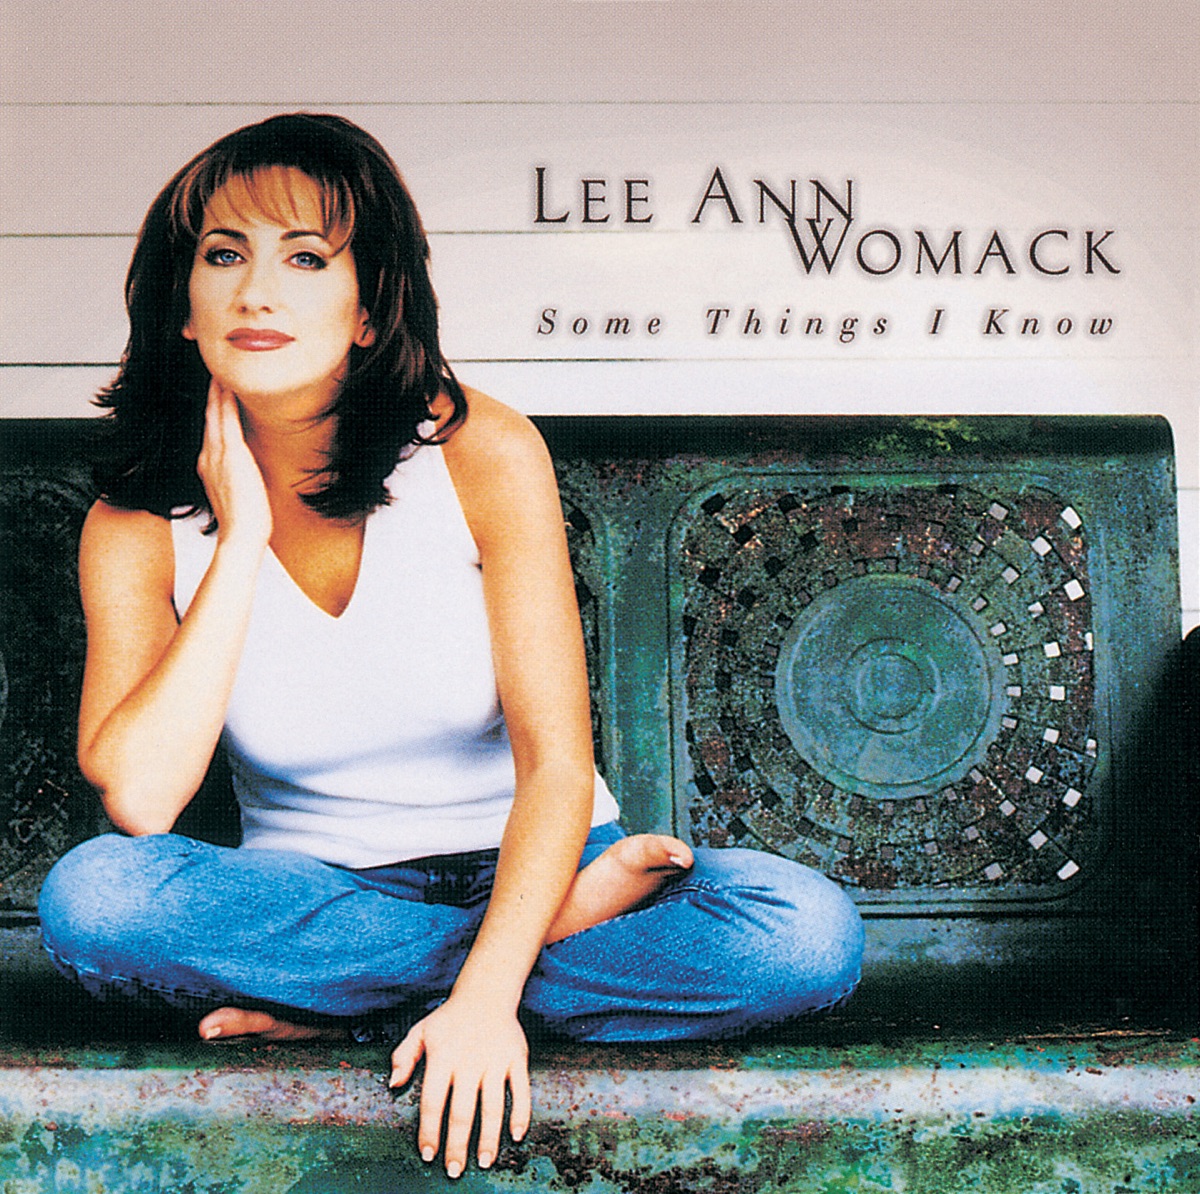 Greatest Hits by Lee Ann Womack on Apple Music